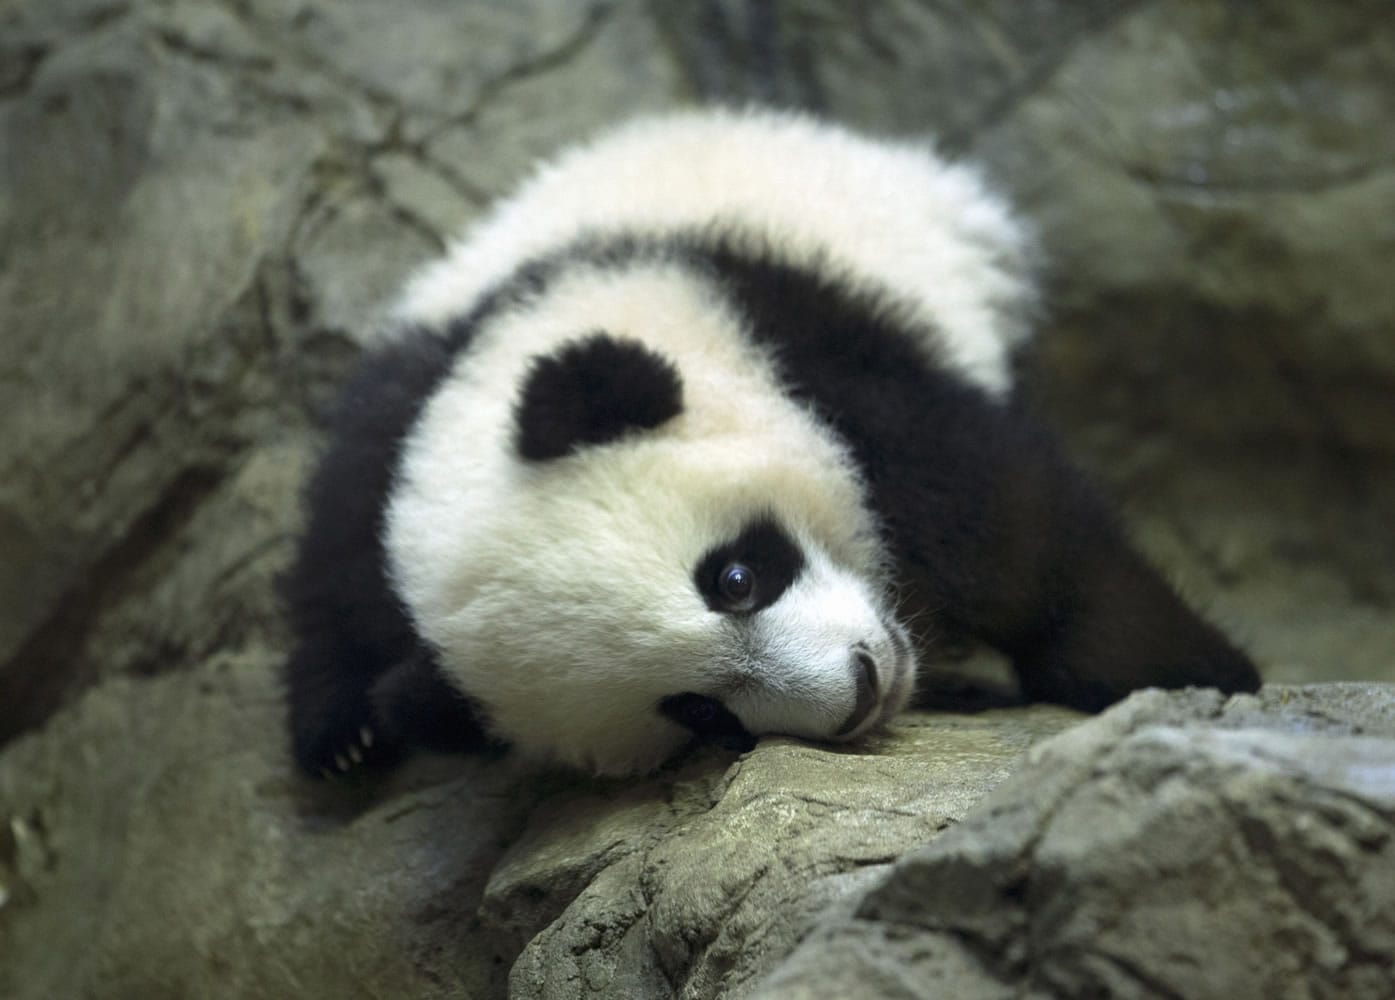 Giant panda cub Bei Bei, seen through glass, roams in his pen at the National Zoo in Washington, Saturday, Jan. 16, 2016. The cub, born Aug. 22, made his public debut Saturday, though zoo members have been able to see him since Jan. 8.